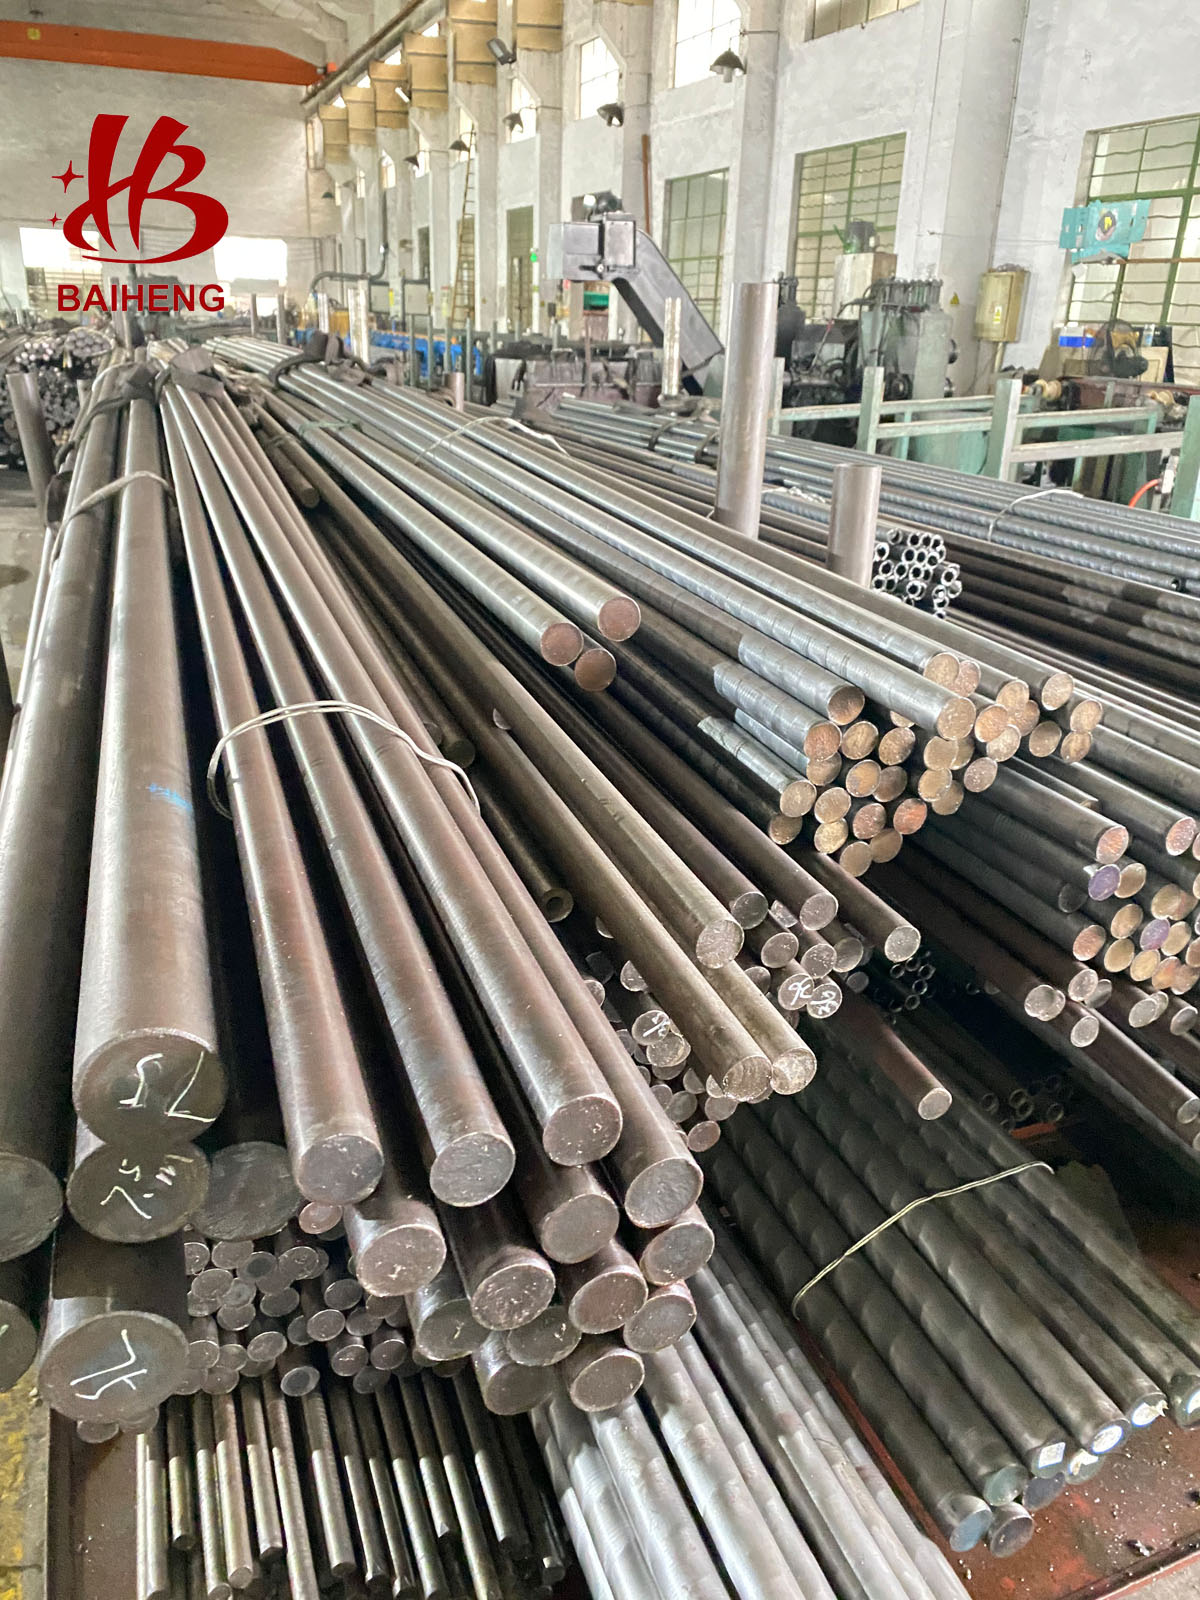 chrome plated bar and piston rod manufacturer in China OD from 8 to 400mm2